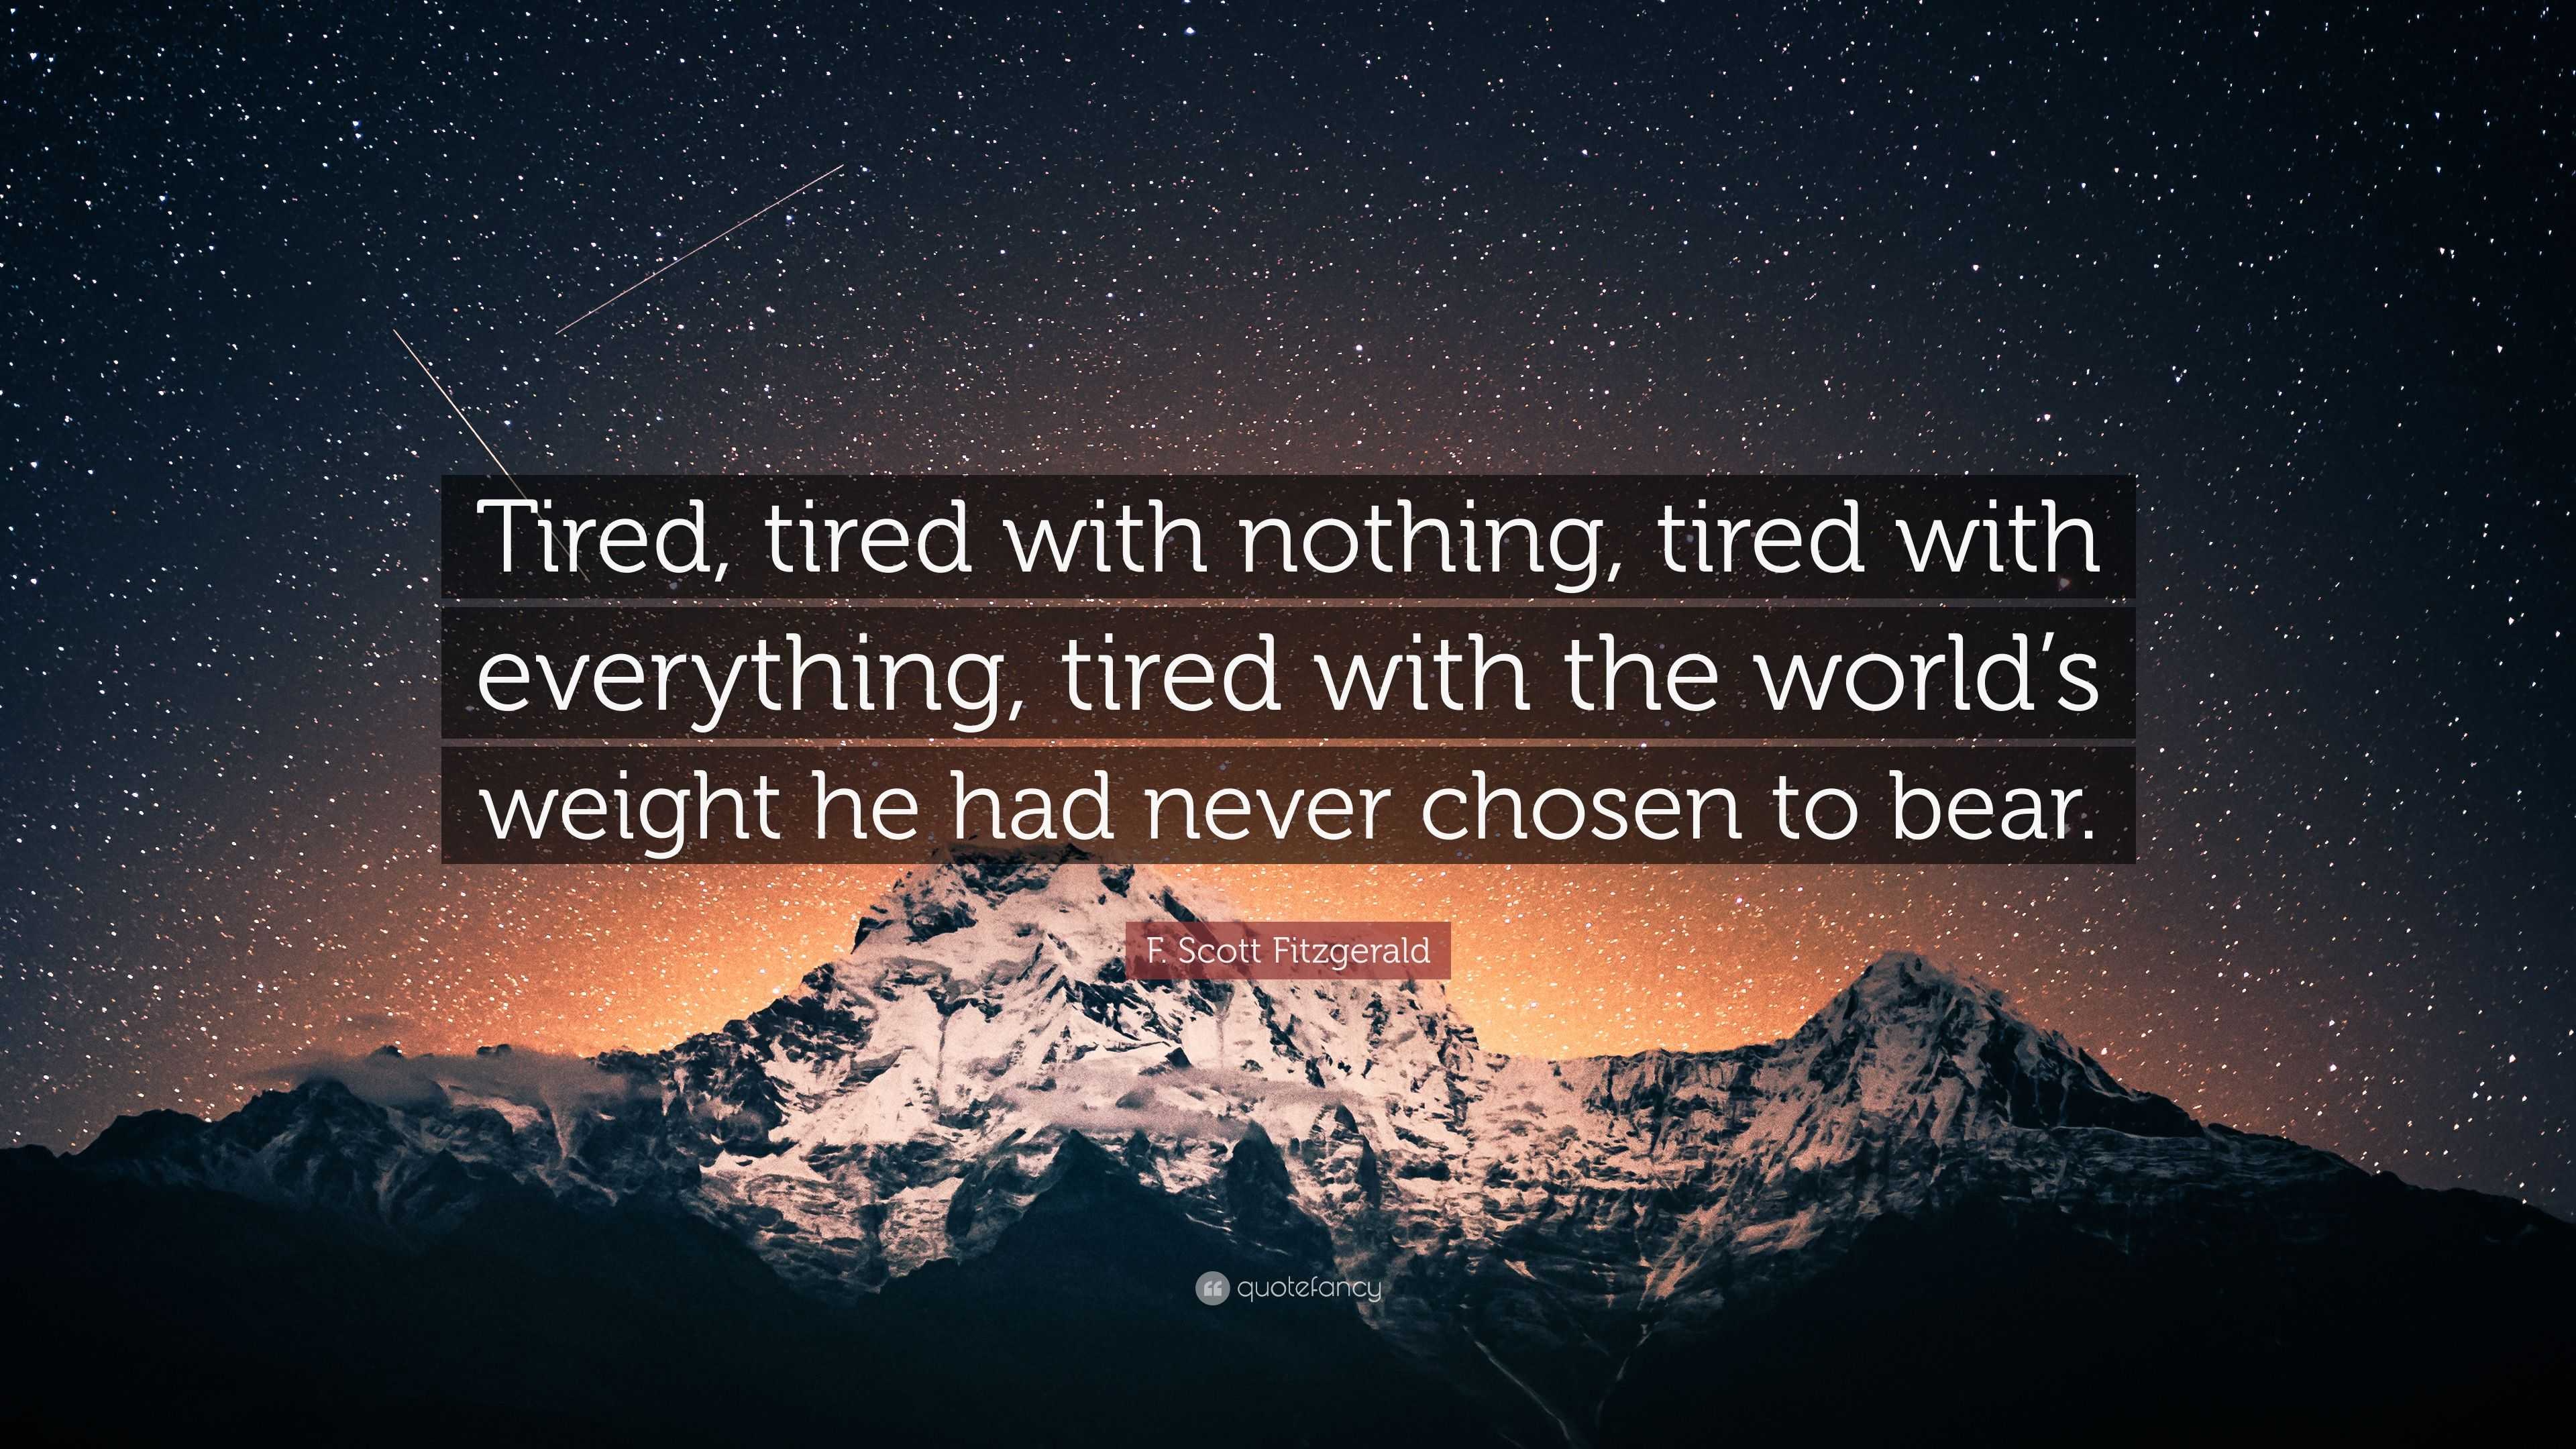 2460318-F-Scott-Fitzgerald-Quote-Tired-tired-with-nothing-tired-with.jpg